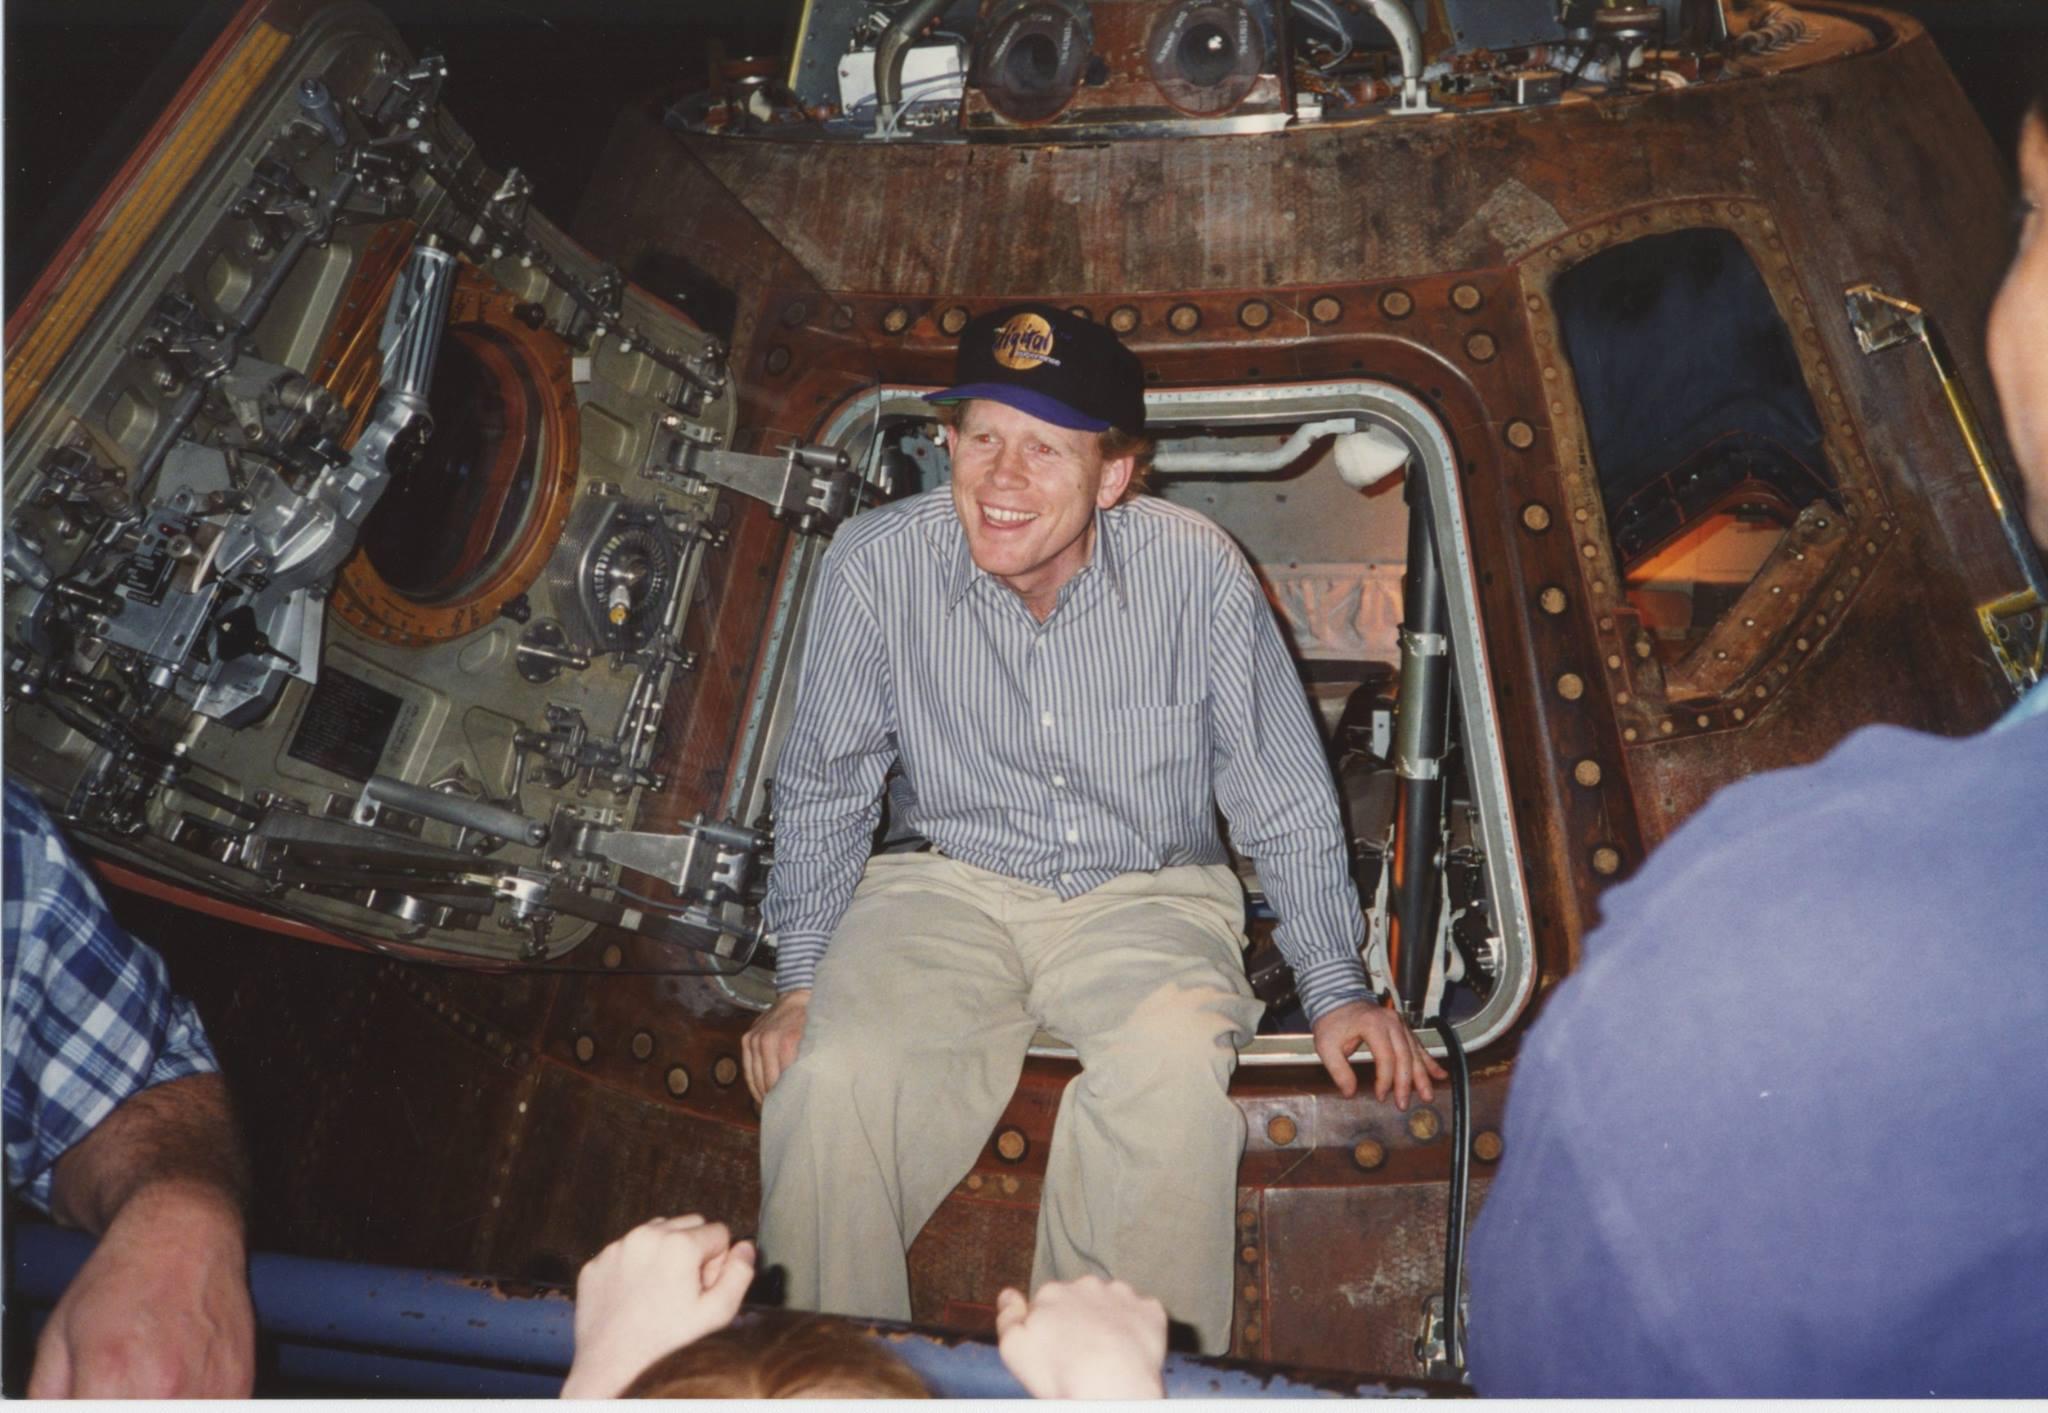 A photo showing Ron Howard and his crew hanging out in a capsule.